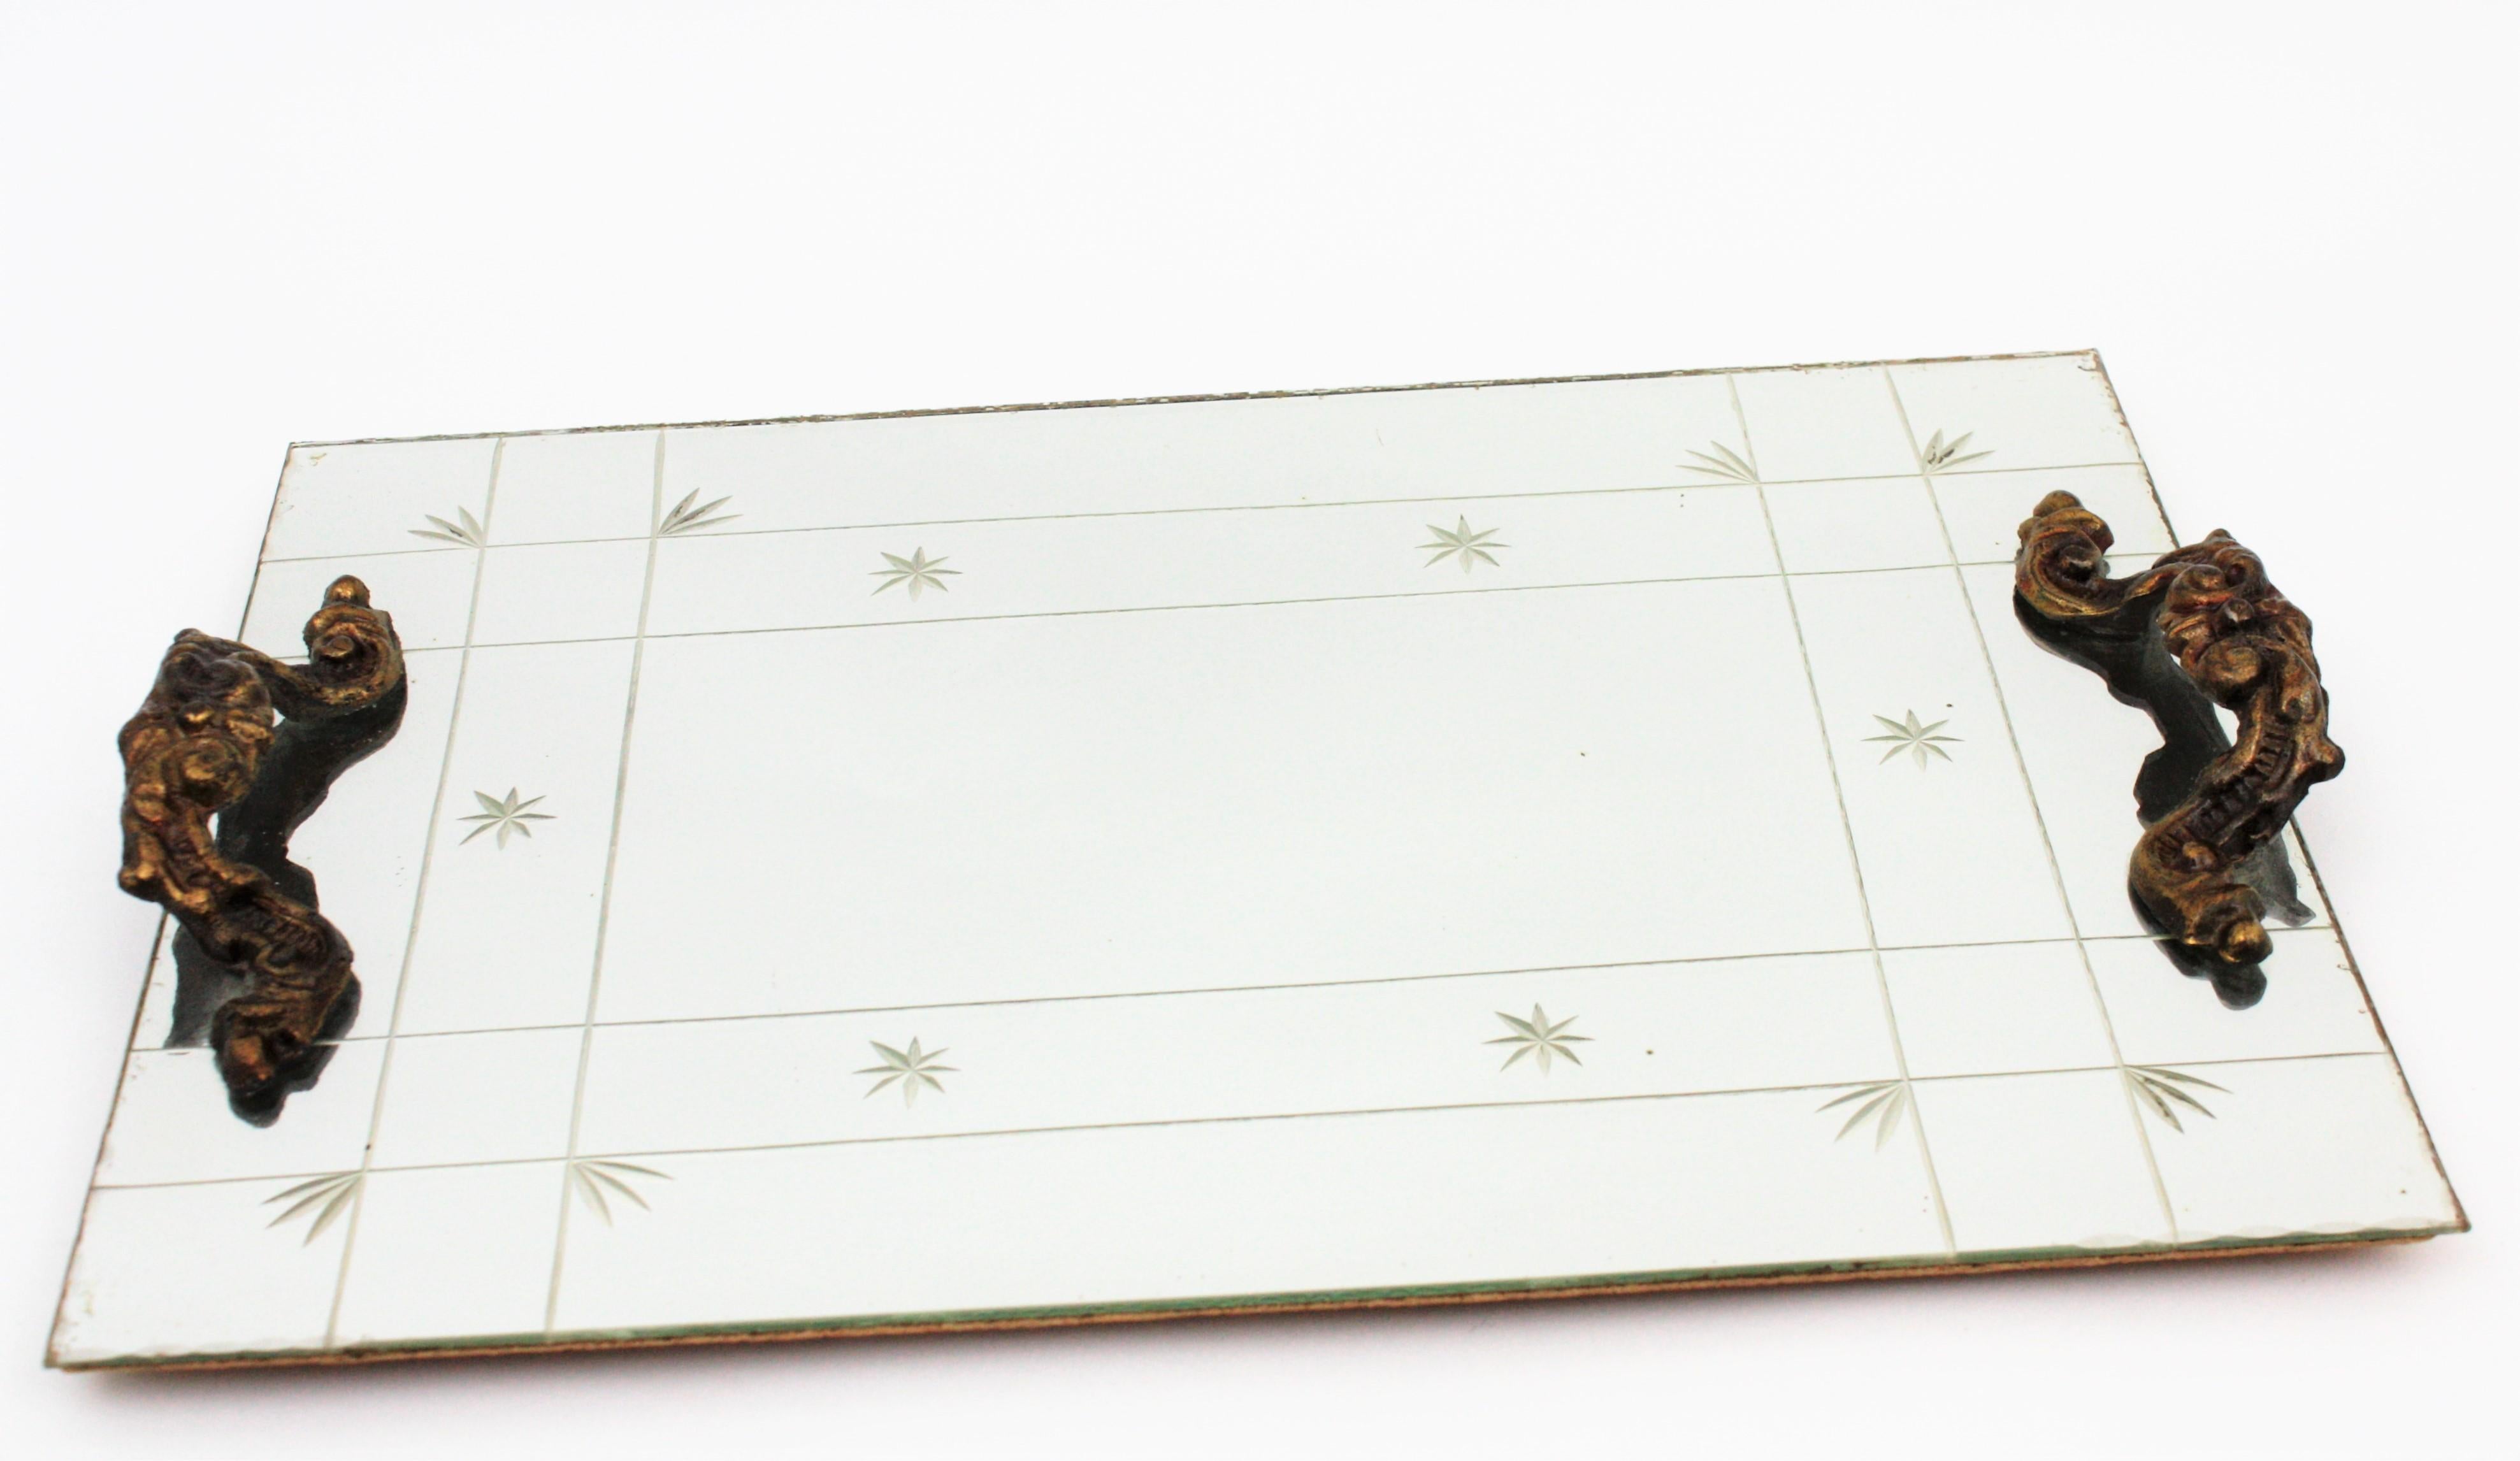 Art Deco mirror serving tray or vanity tray with engraved motifs and bronze handles. Spain 1920s
The tras a mirror surface with stars, leaves and stripes engraved details, naturalistic motifs decorating the handles and it shows a beautiful antique